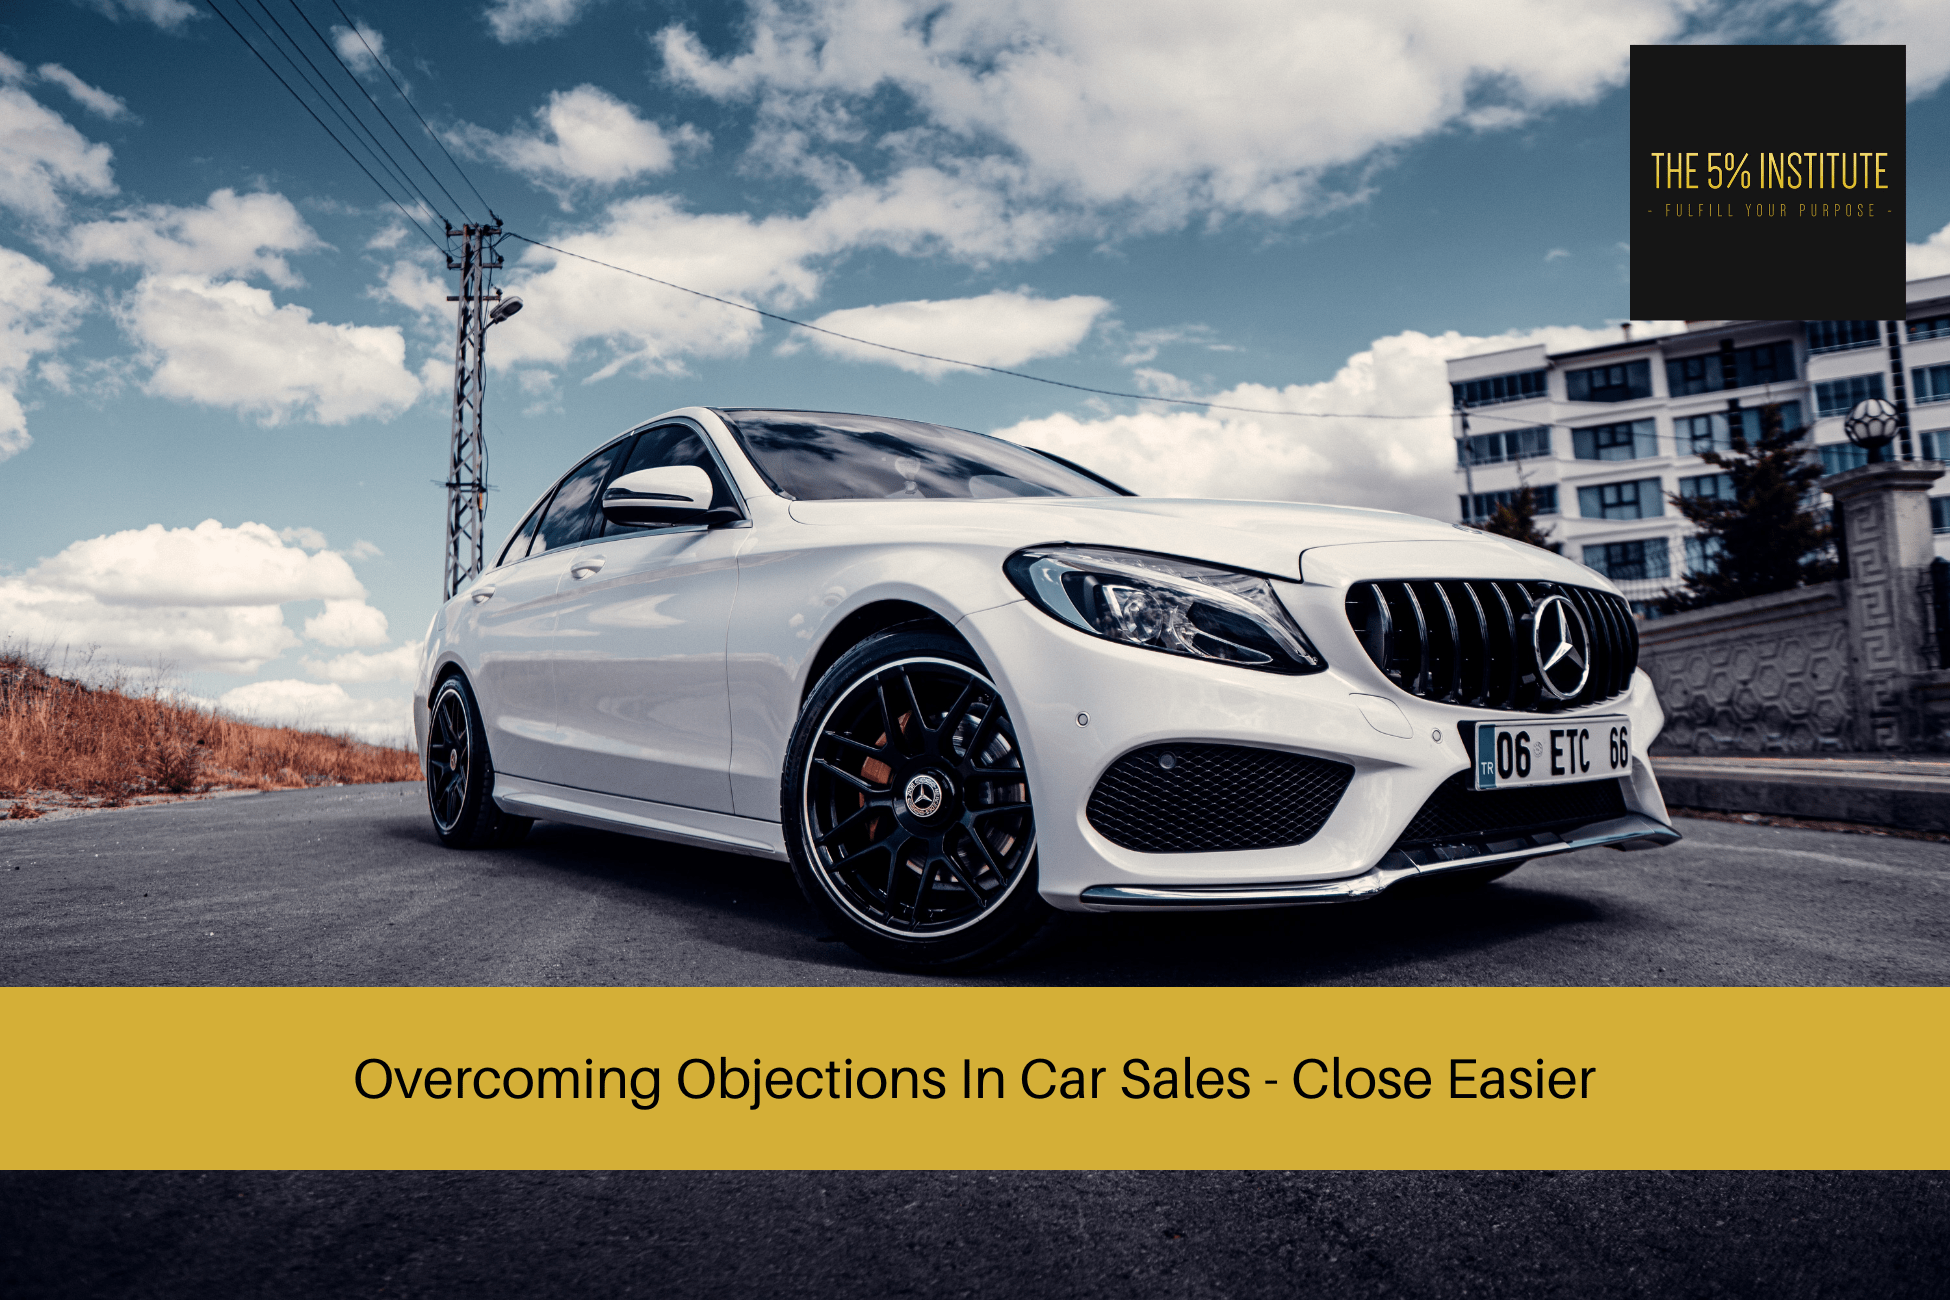 Overcoming Objections In Car Sales - Close Easier